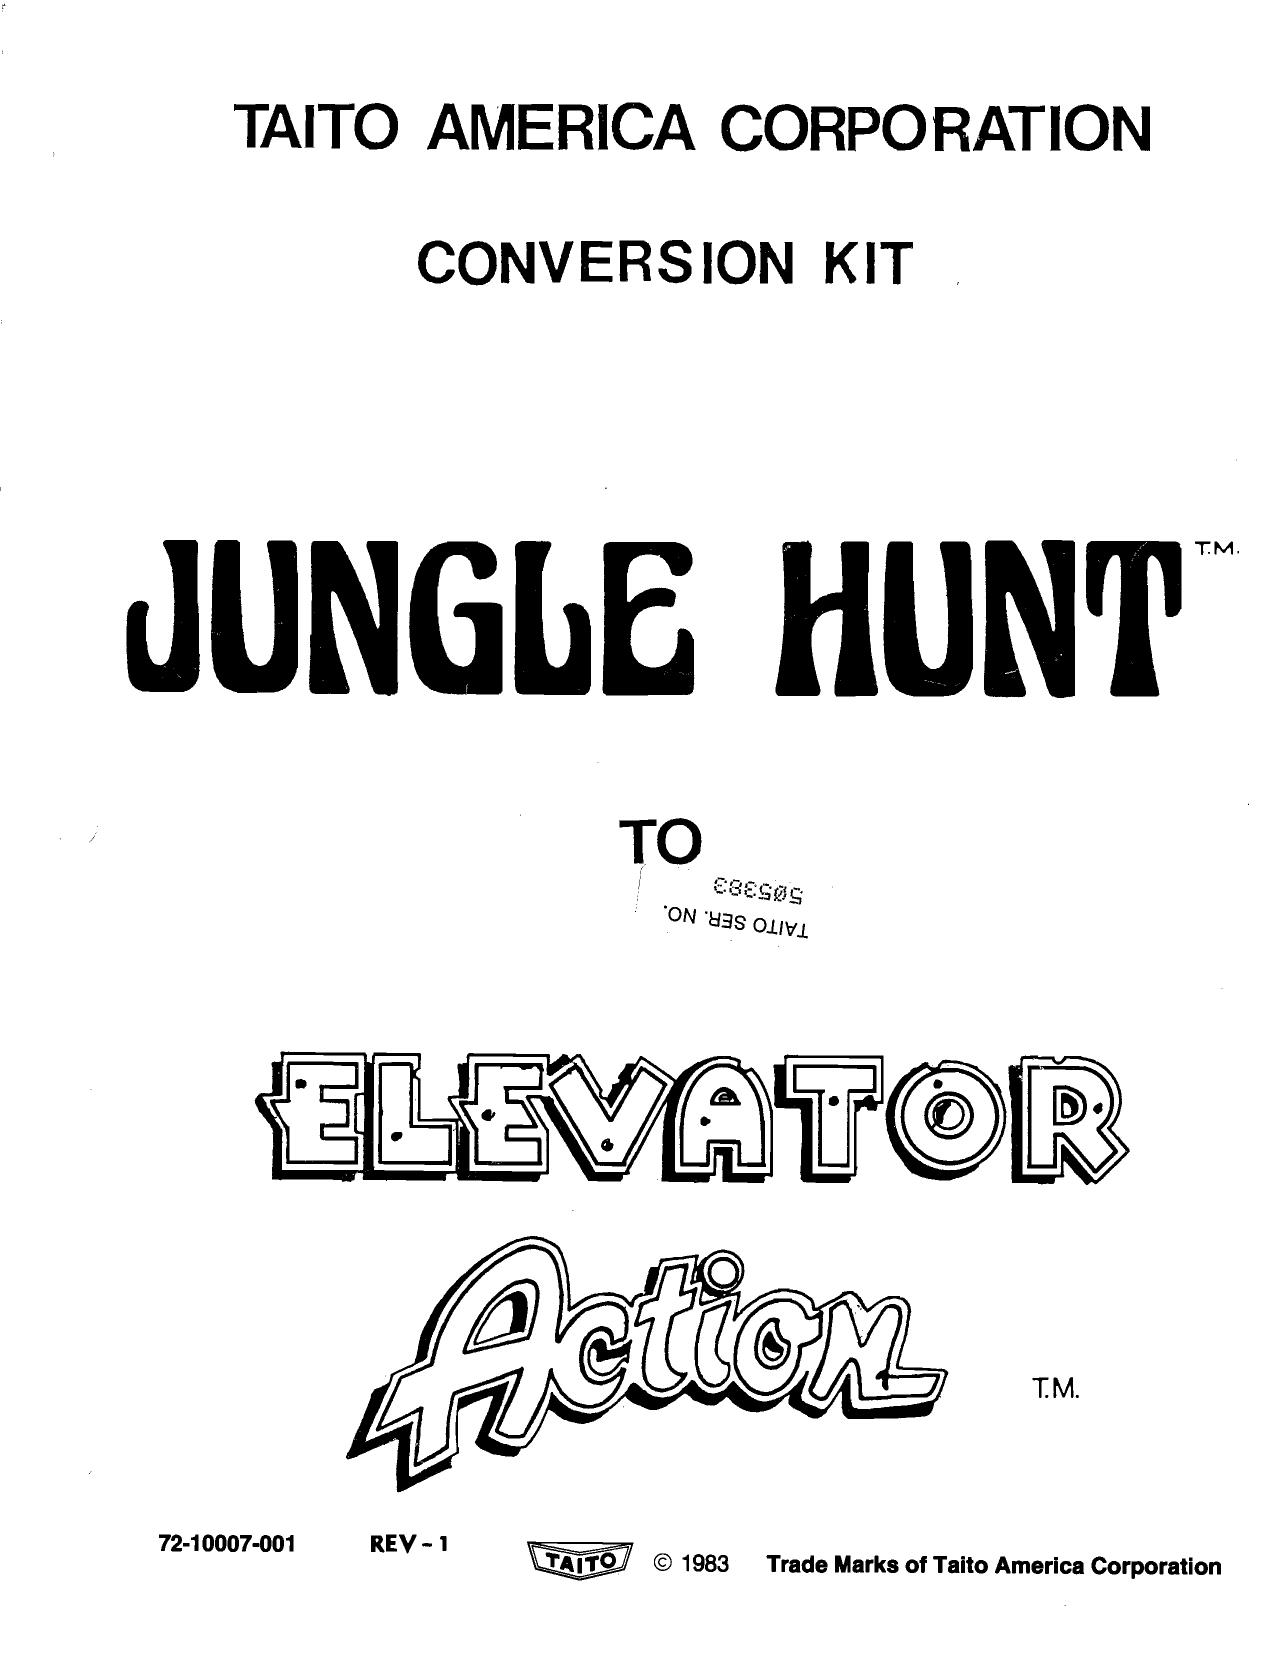 Jungle Hunt to Elevation Action Conversion Kit